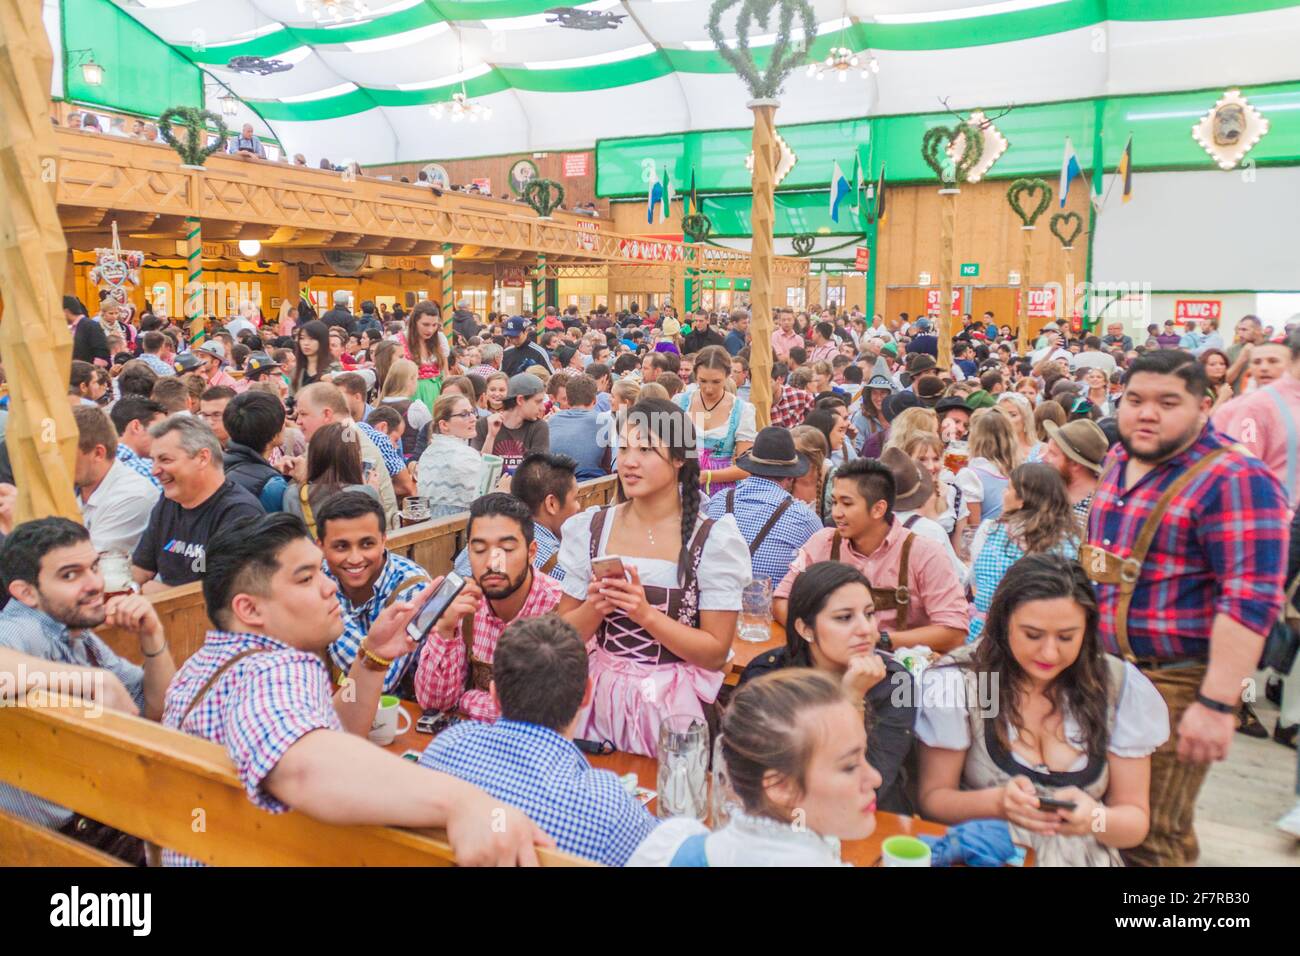 MUNICH, GERMANY - SEPTEMBER 17, 2016: People drink beer in one of the tents of the Oktoberfest in Munich. Stock Photo